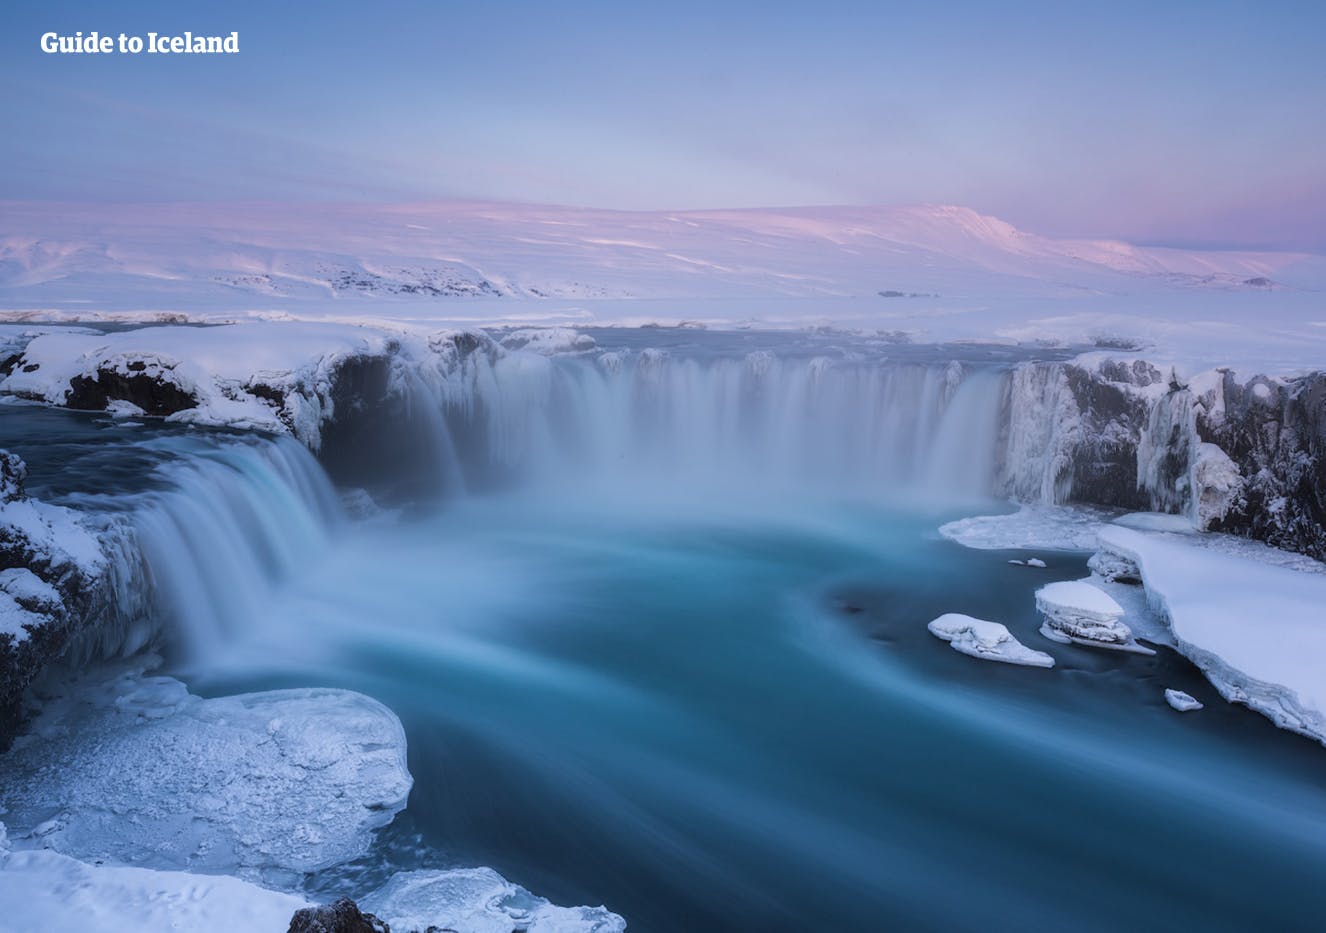 Water falling down arch-shaped cliffs form northern Iceland's Goðafoss waterfall.